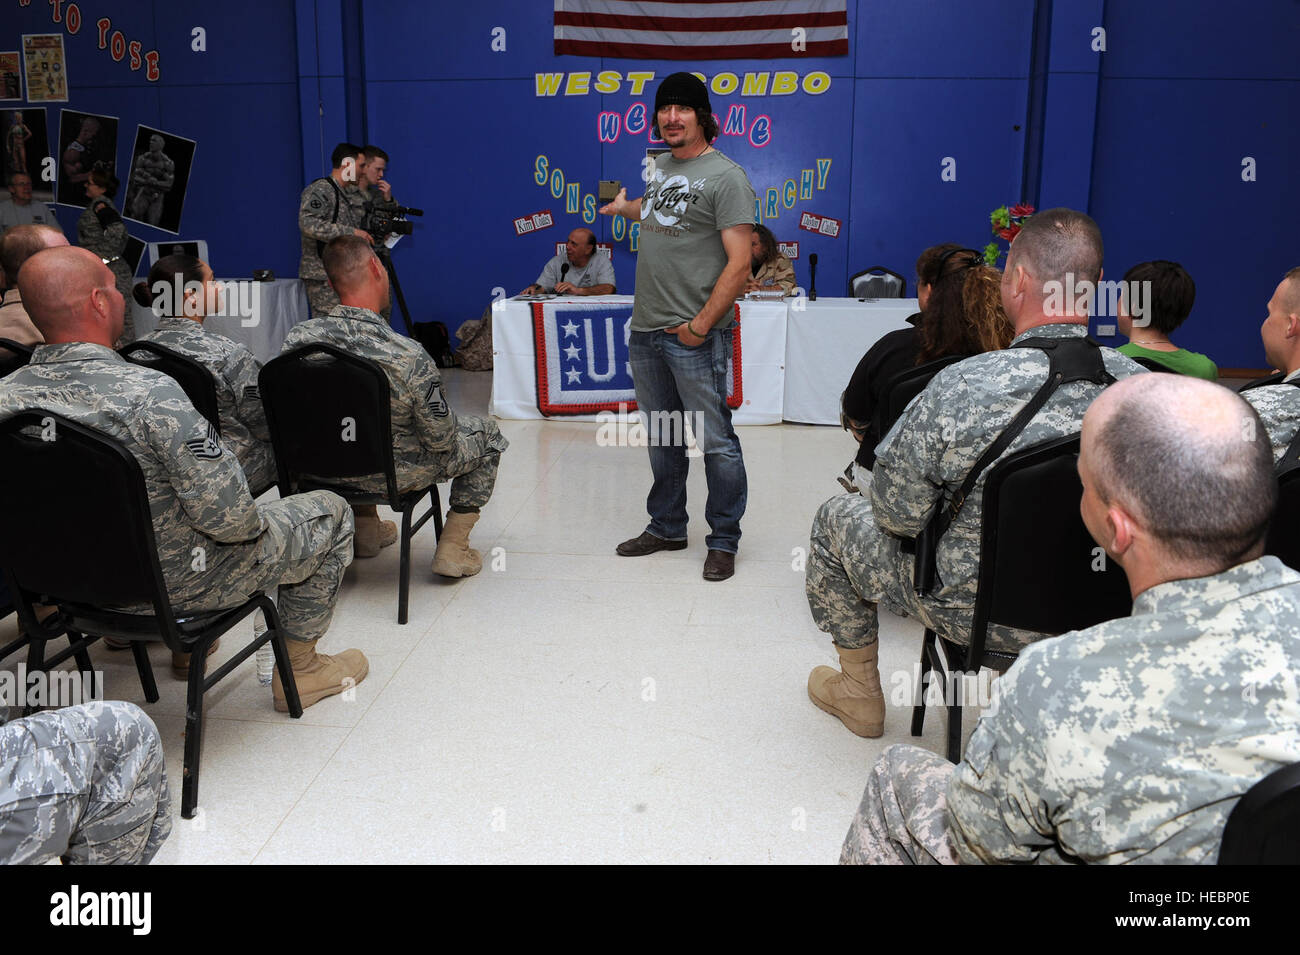 Kim Coates, a cast member of Sons of Anarchy, speaks to military personnel prior to a meet and greet event at Joint Base Balad, Iraq, March 15, 2010. Four cast members from the hit television show are touring bases throughout Southwest Asia to show their appreciation and provide a morale boost for deployed personnel. (U.S. Air Force photo by Master Sgt. Linda C. Miller/Released) Stock Photo